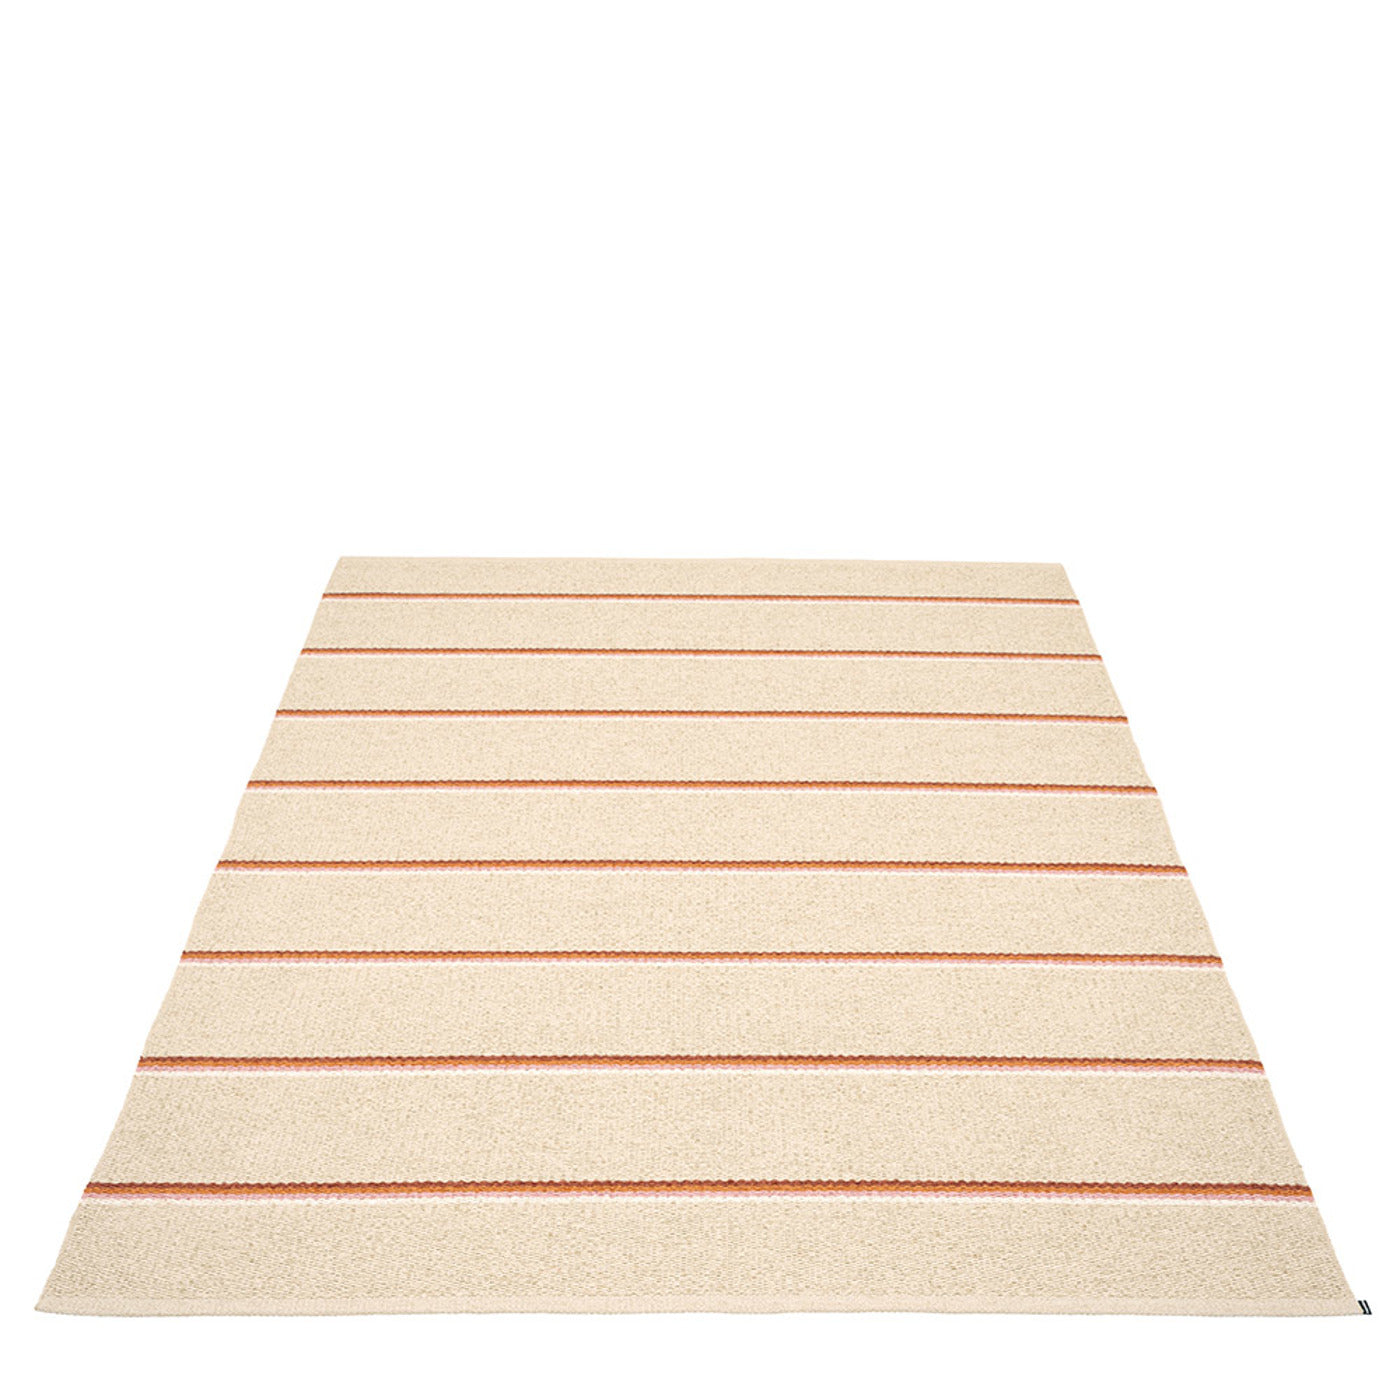 All sizes OLLE RUG - Brick